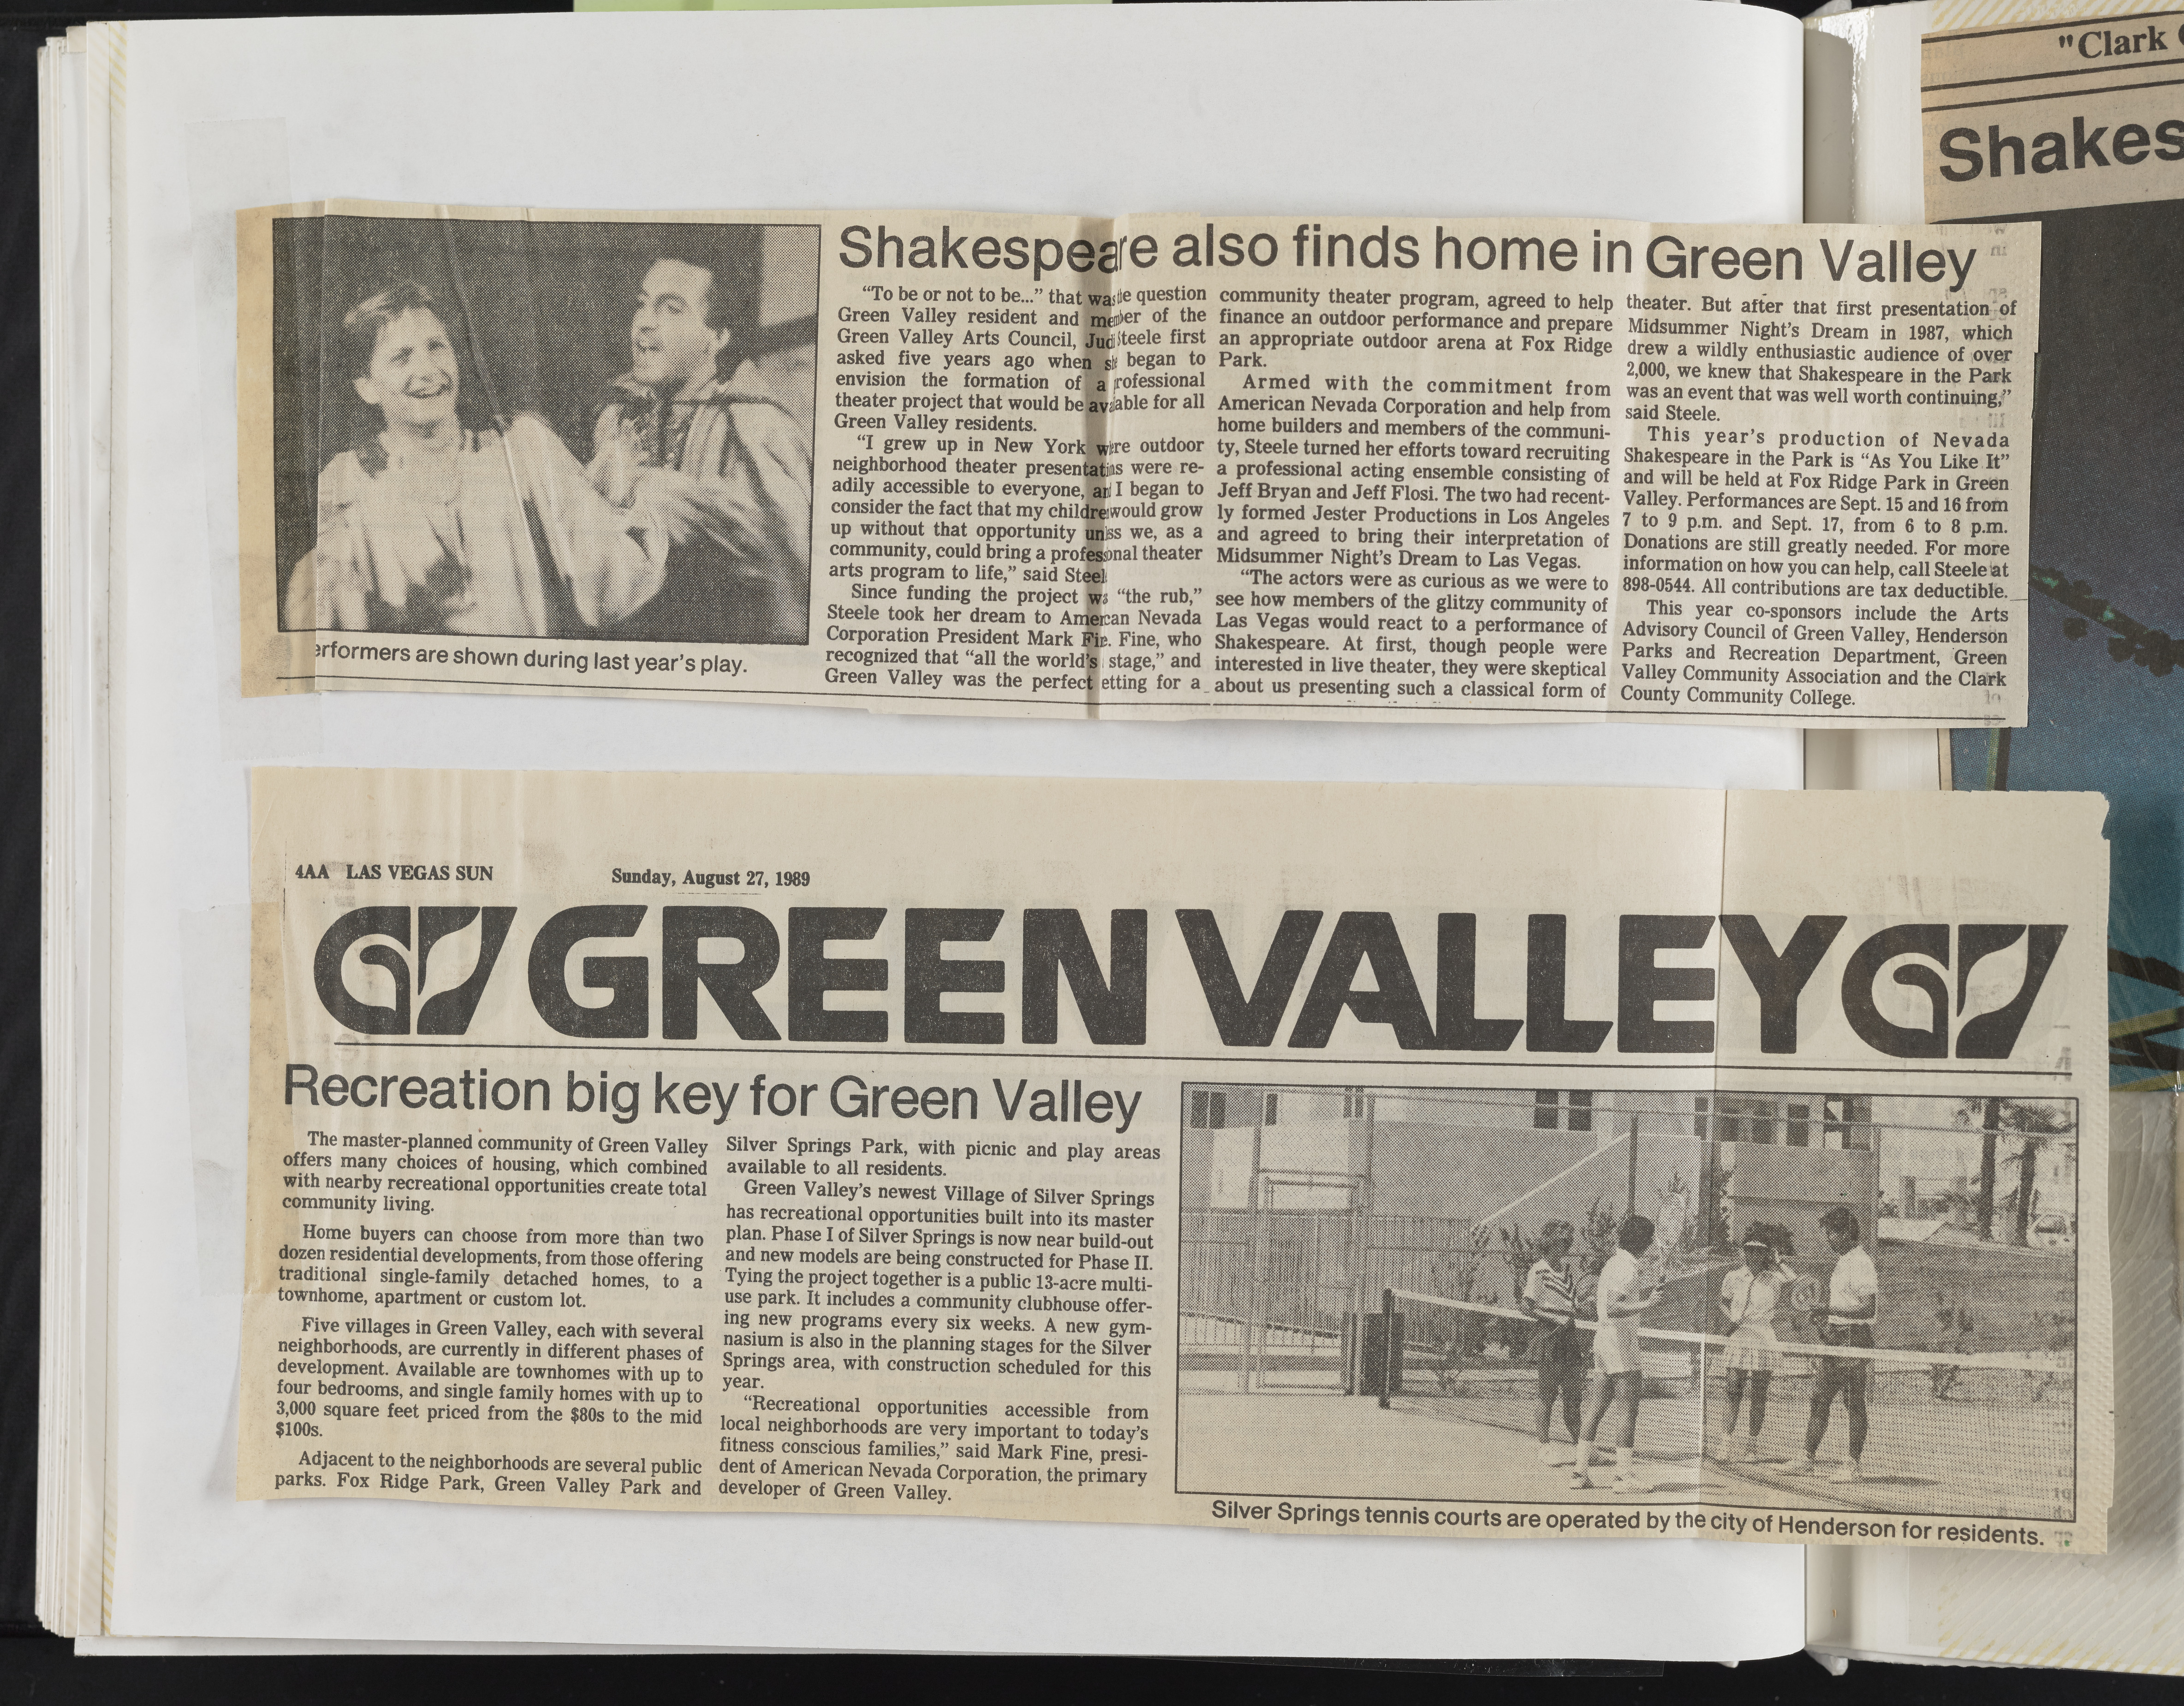 Newspaper clippings about Green Valley events, 1989